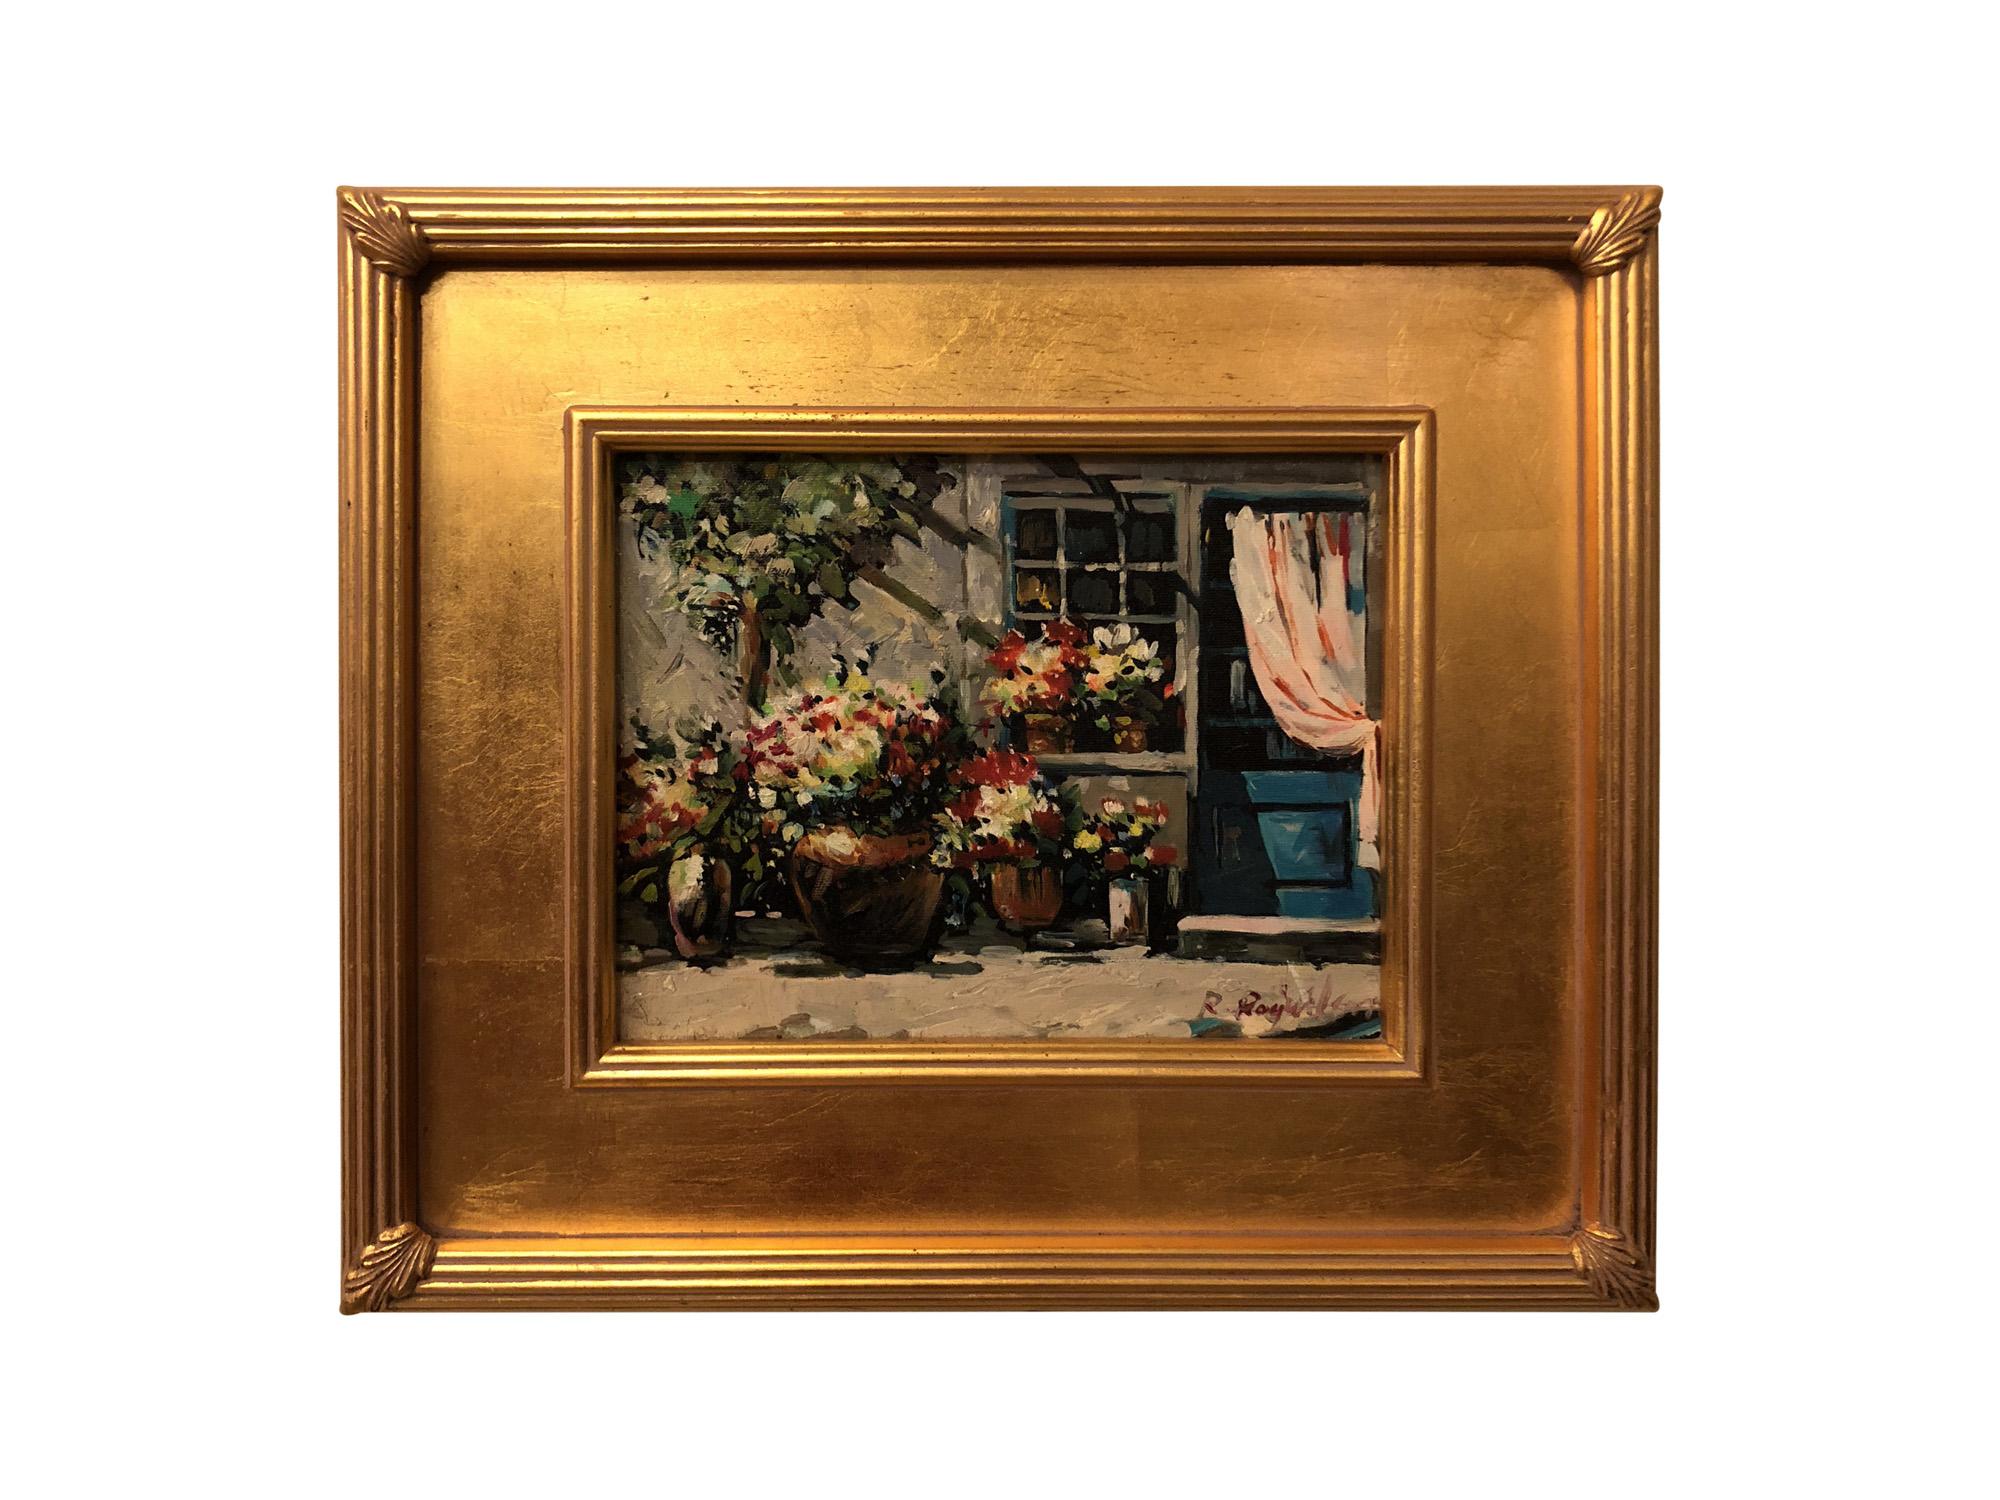 Unknown Still-Life Painting - 1980s Impressionistic Oil on Canvas Painting of a Patio Signed by Artist